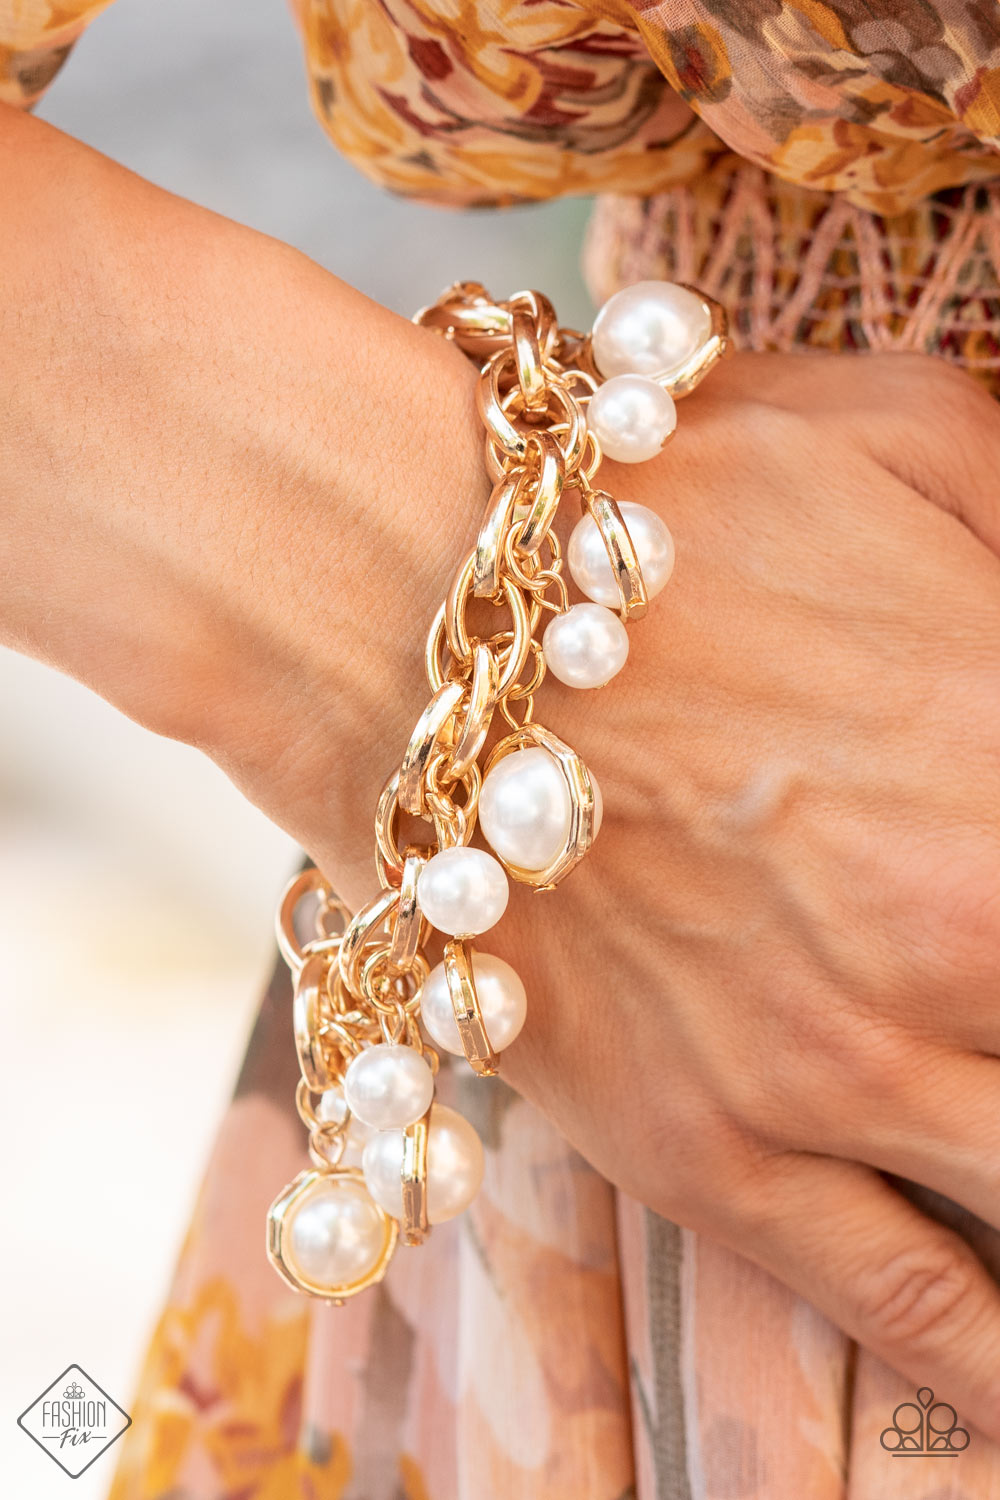 Orbiting Opulence - Gold Pearl Bracelets classic white pearls and solitaire pearls that are threaded along a rod inside imperfect gold rings swing from a chunky double-linked gold chain around the wrist, creating a dramatic fringe. Features an adjustable clasp closure.  Sold as one individual bracelet.